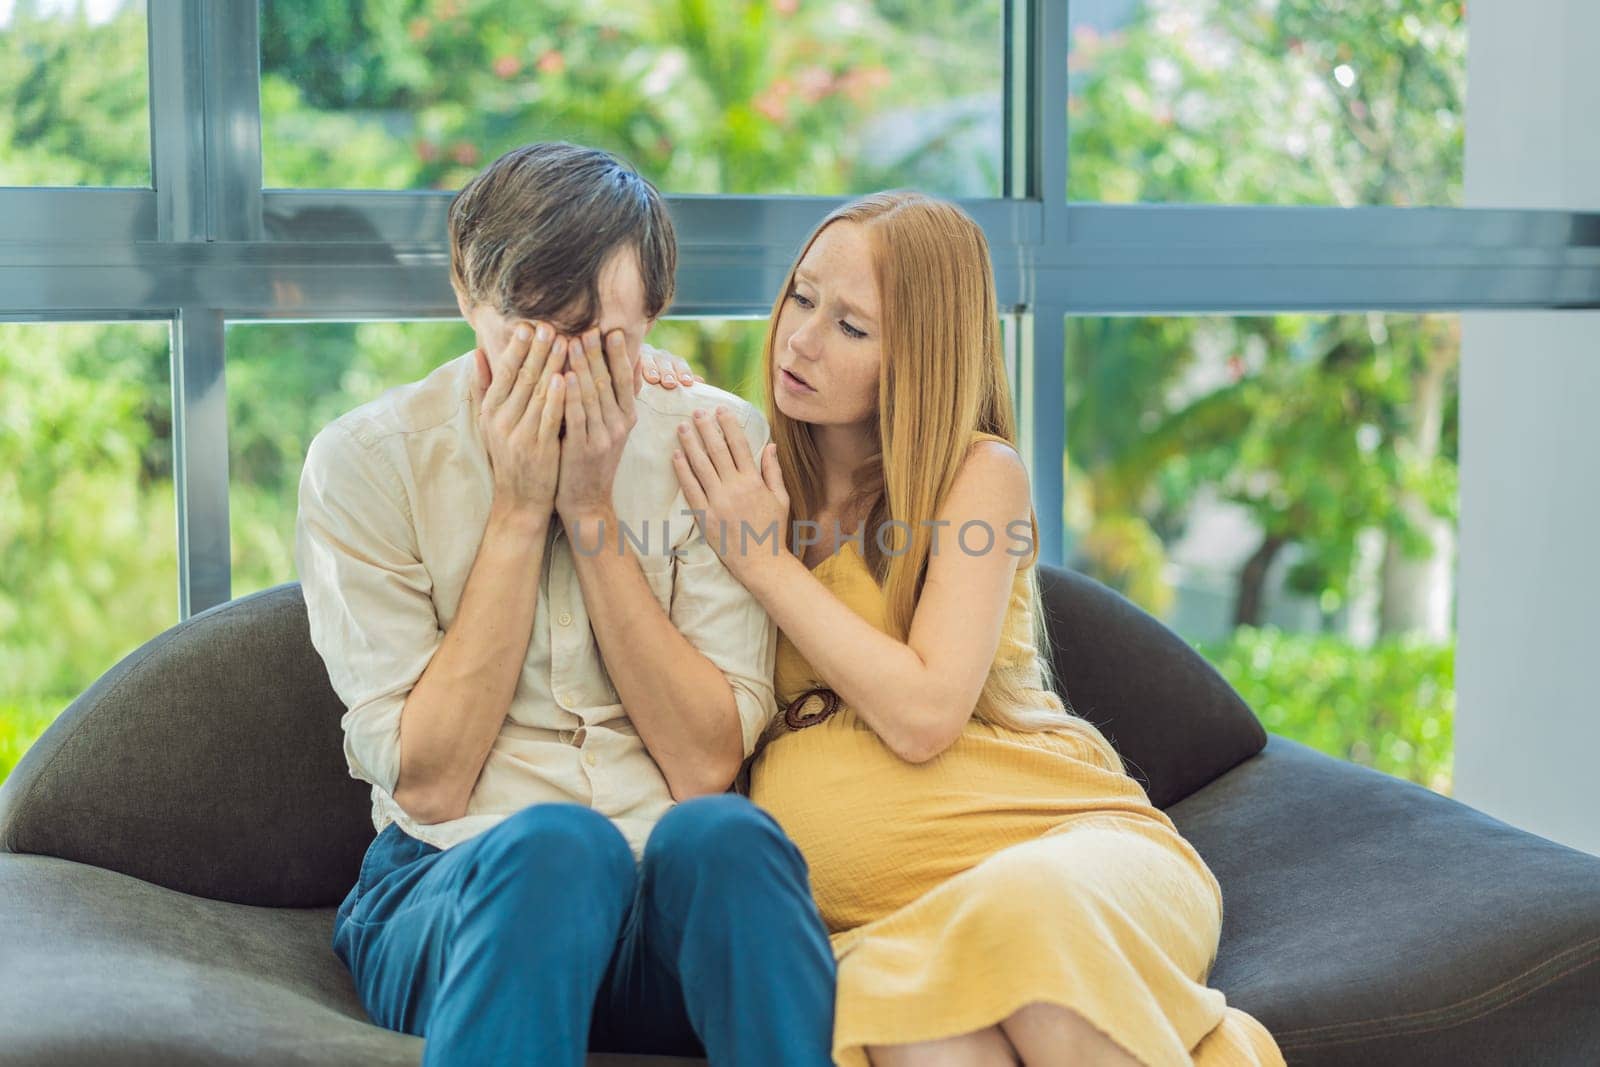 Concerned husband anxiously worries about his wife's pregnancy, seeking reassurance and support.